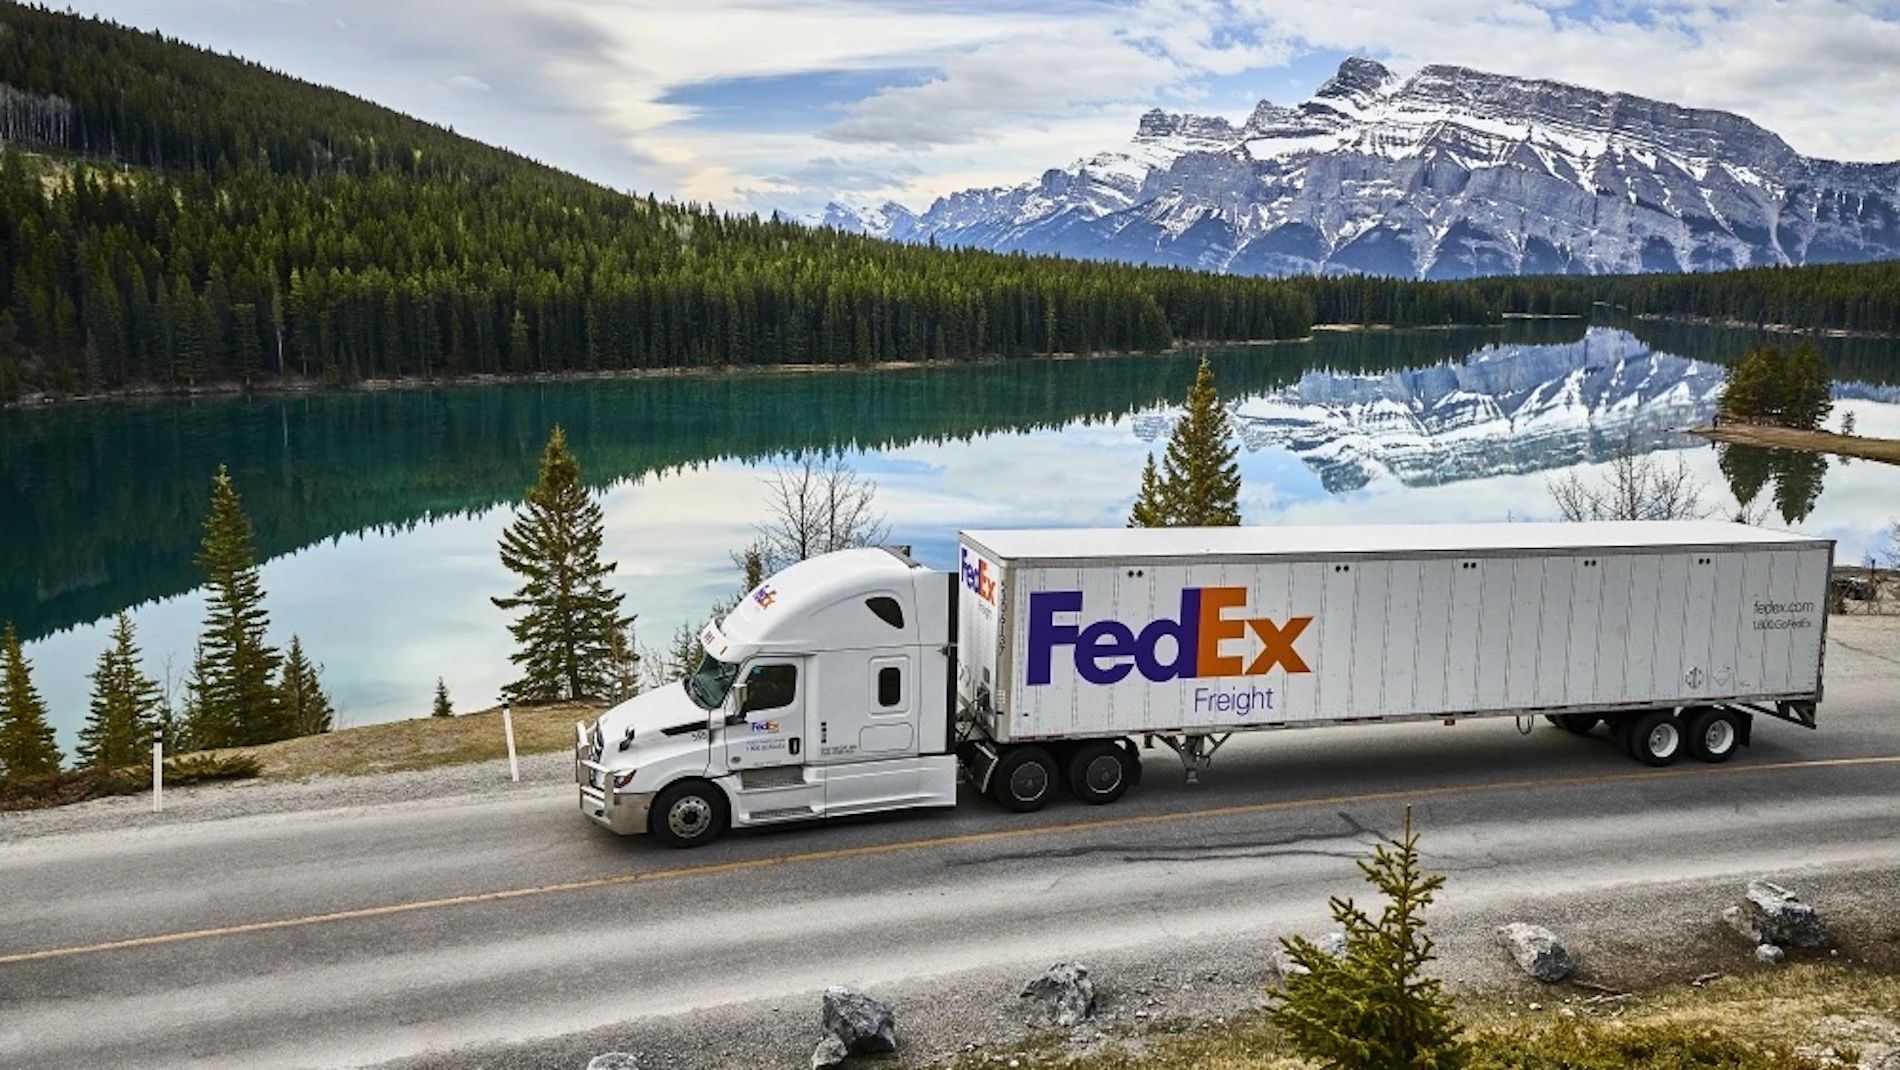 camion fedex freight